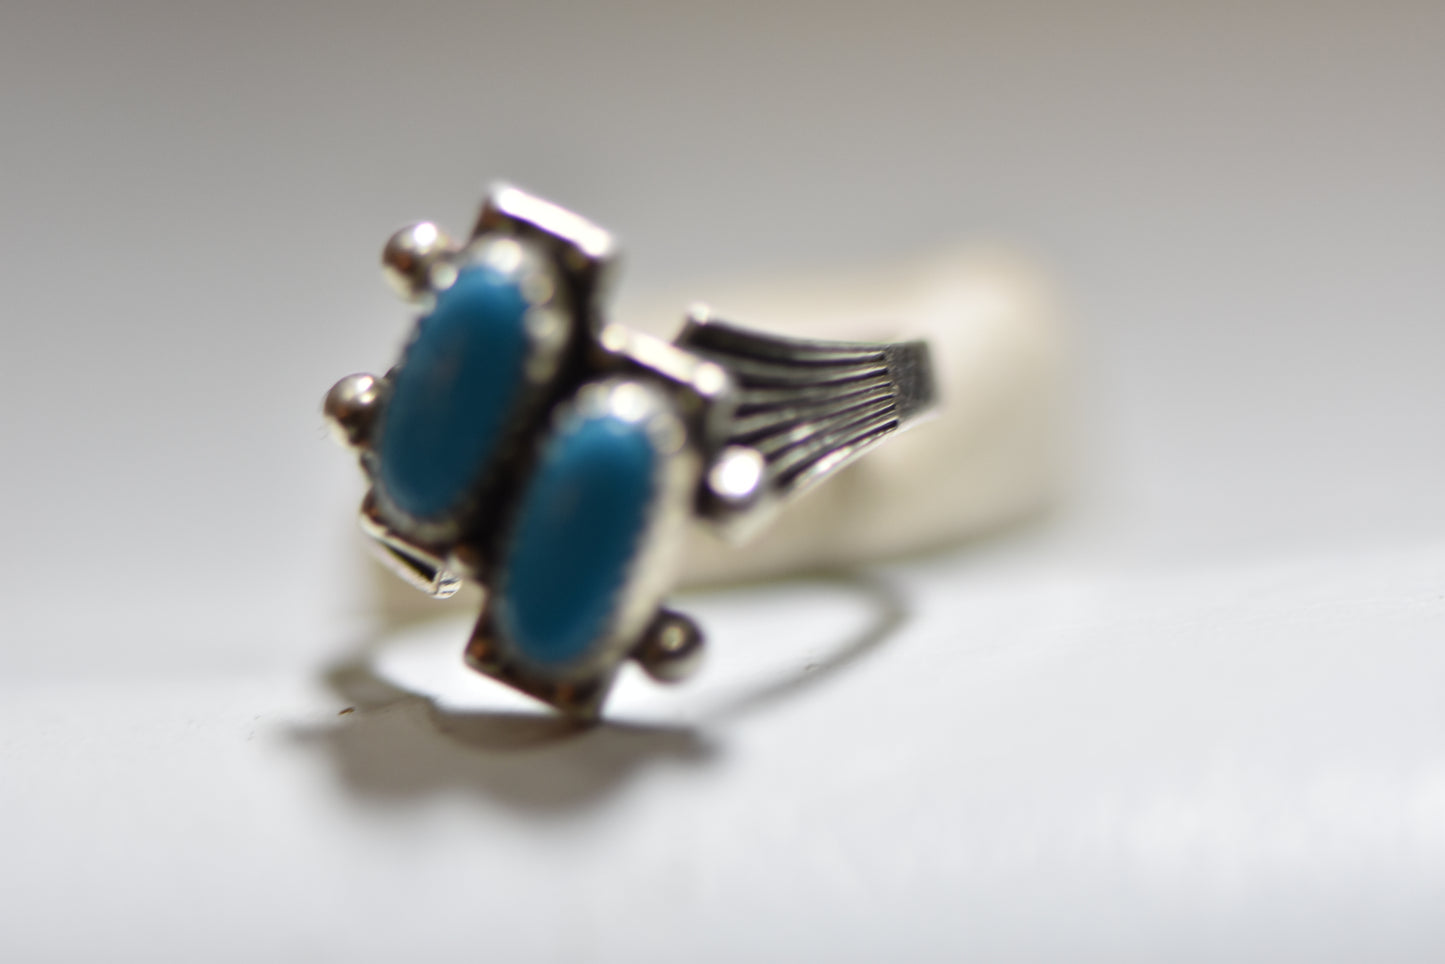 Zuni ring turquoise petite point pinky baby women girls sterling silver